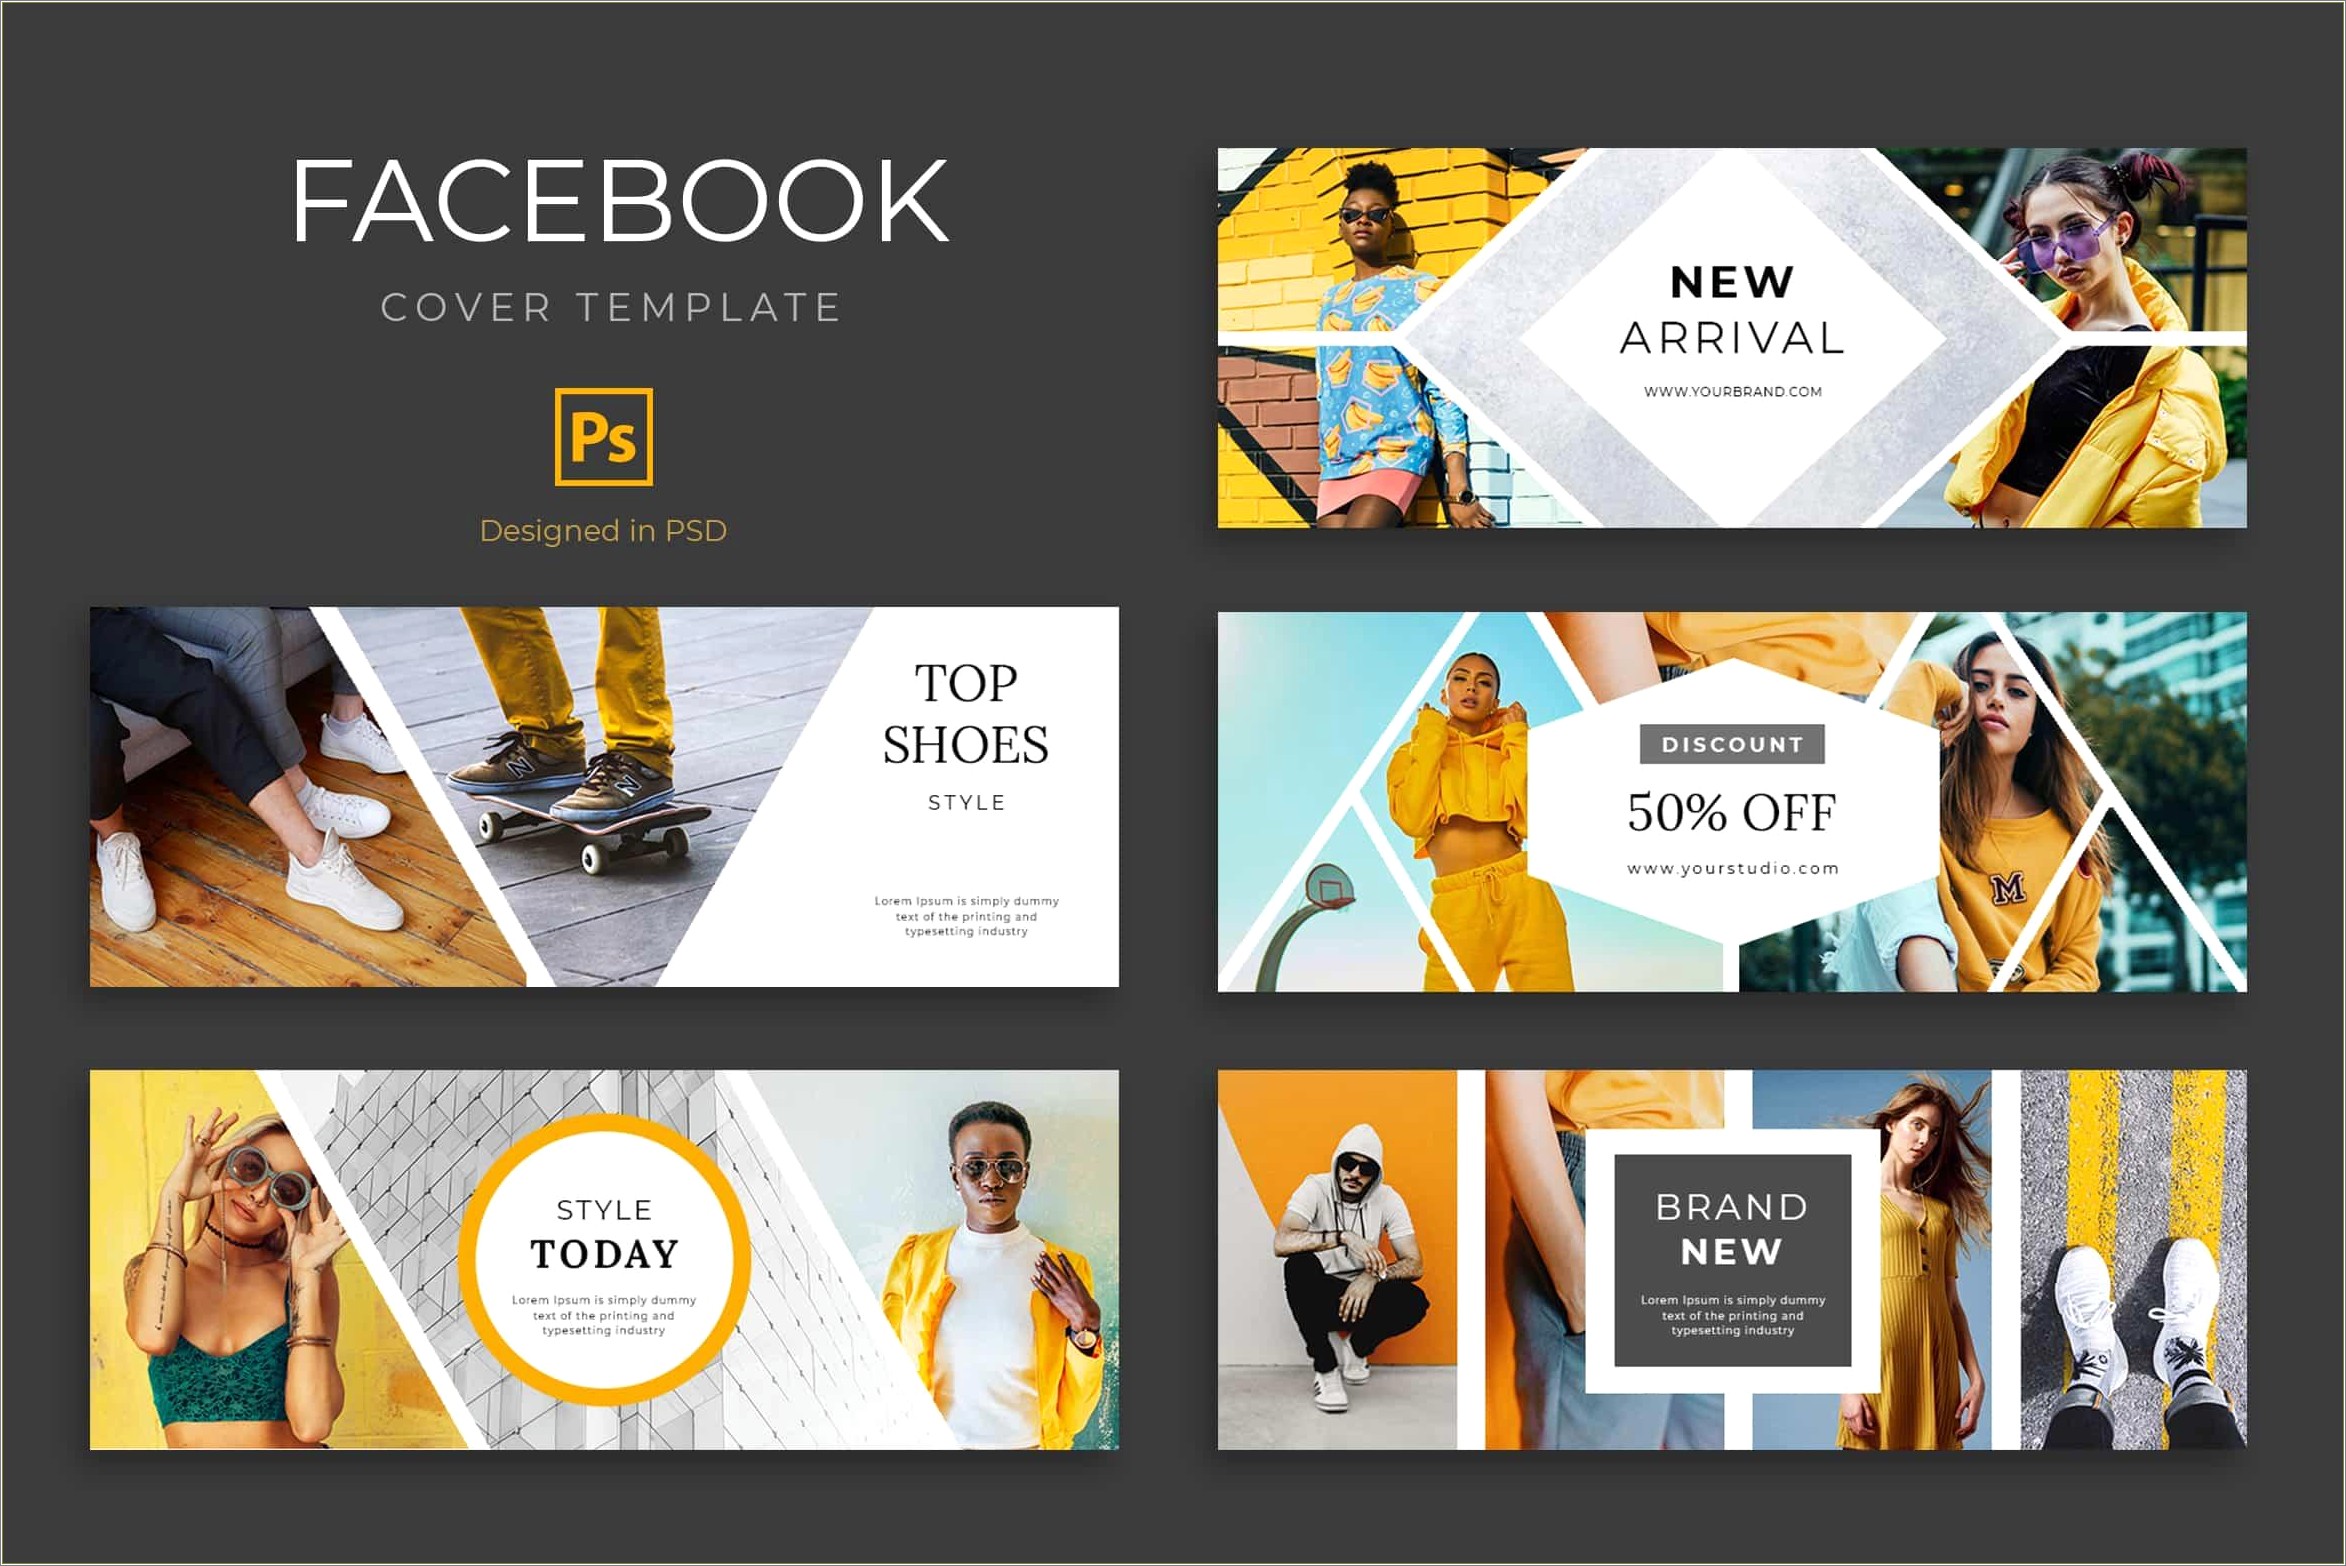 Facebook Cover Photo Template Psd 2019 Free Download